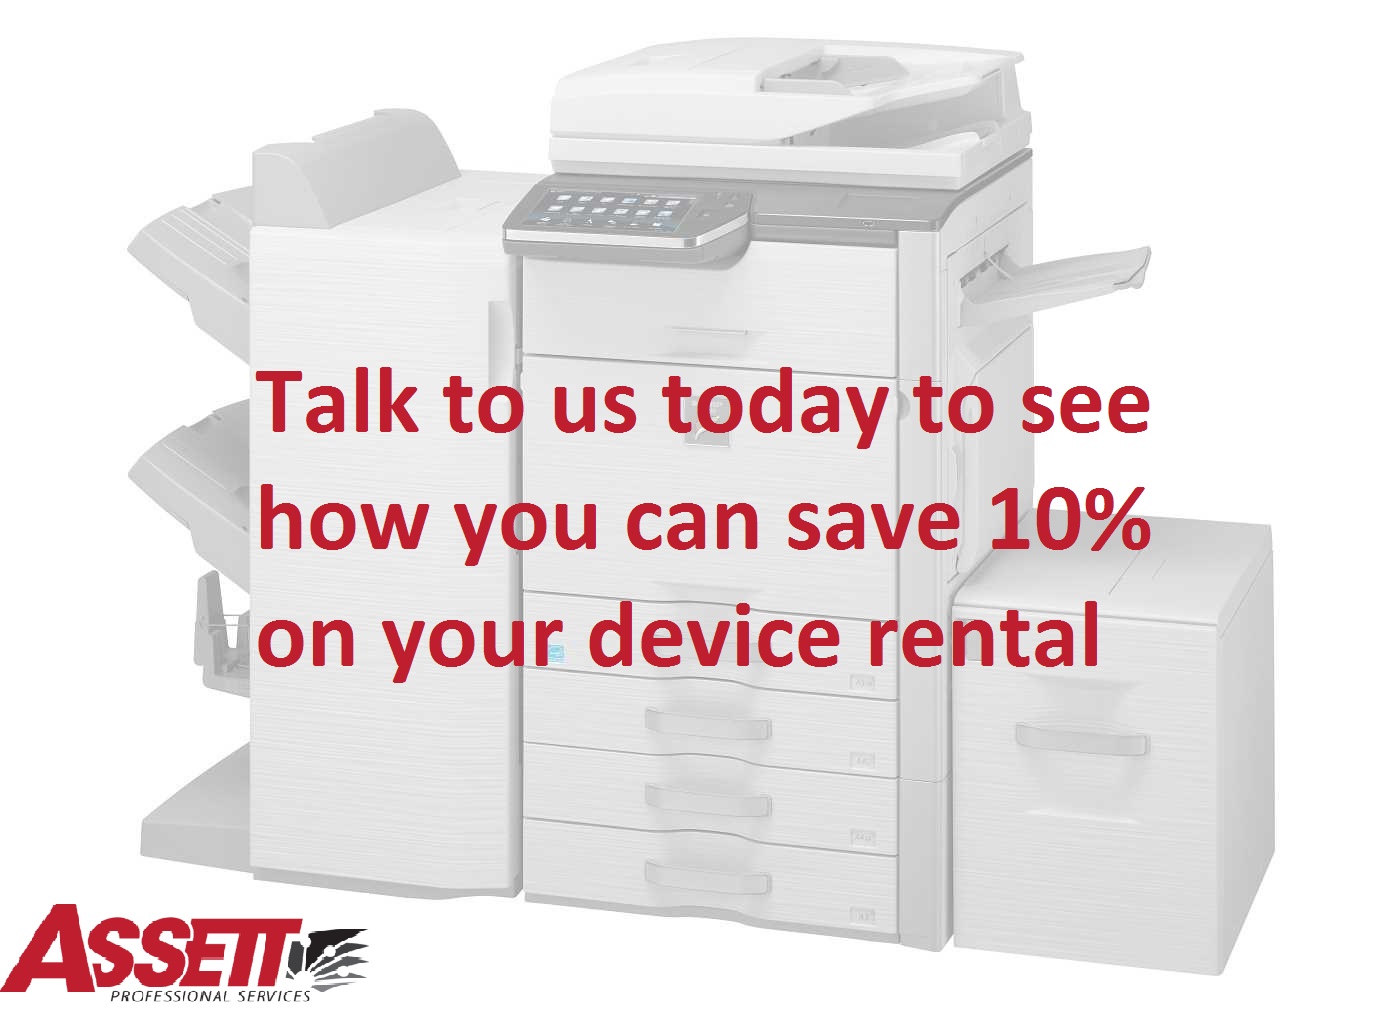 Save 10% of device rental